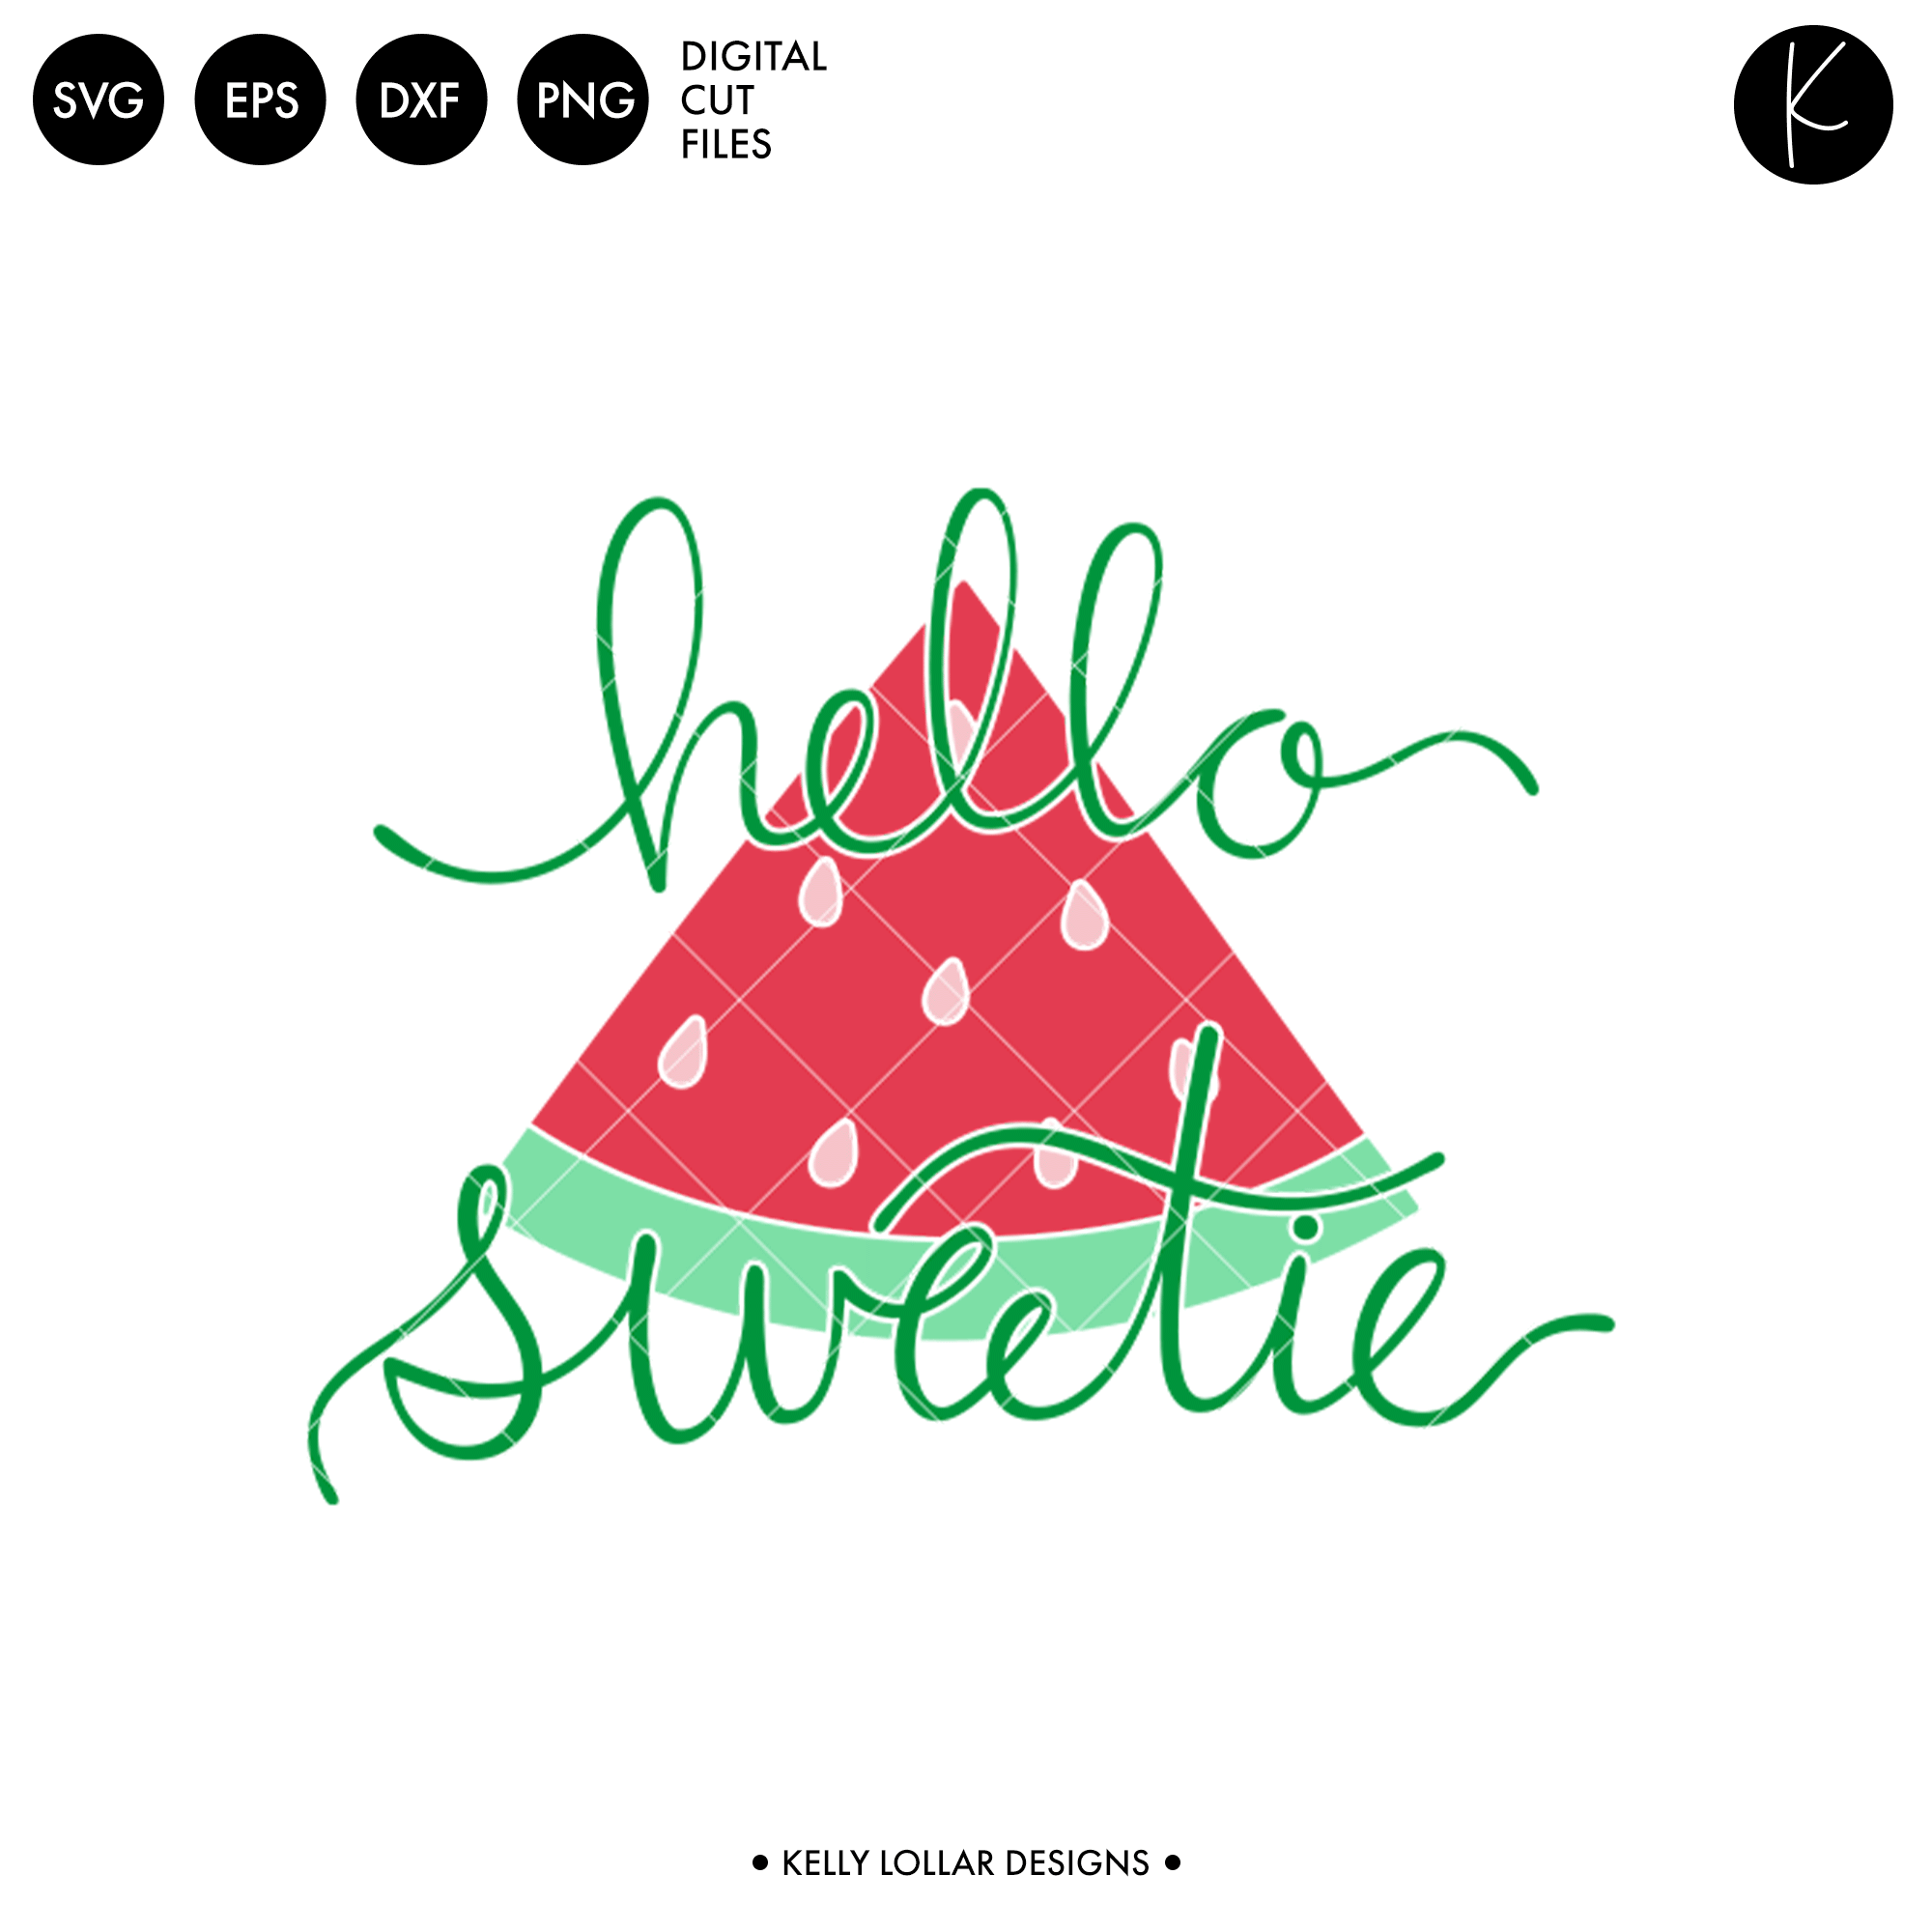 Hello Sweetie Watermelon SVG DXF EPS PNG Cut Files Kelly Lollar Designs